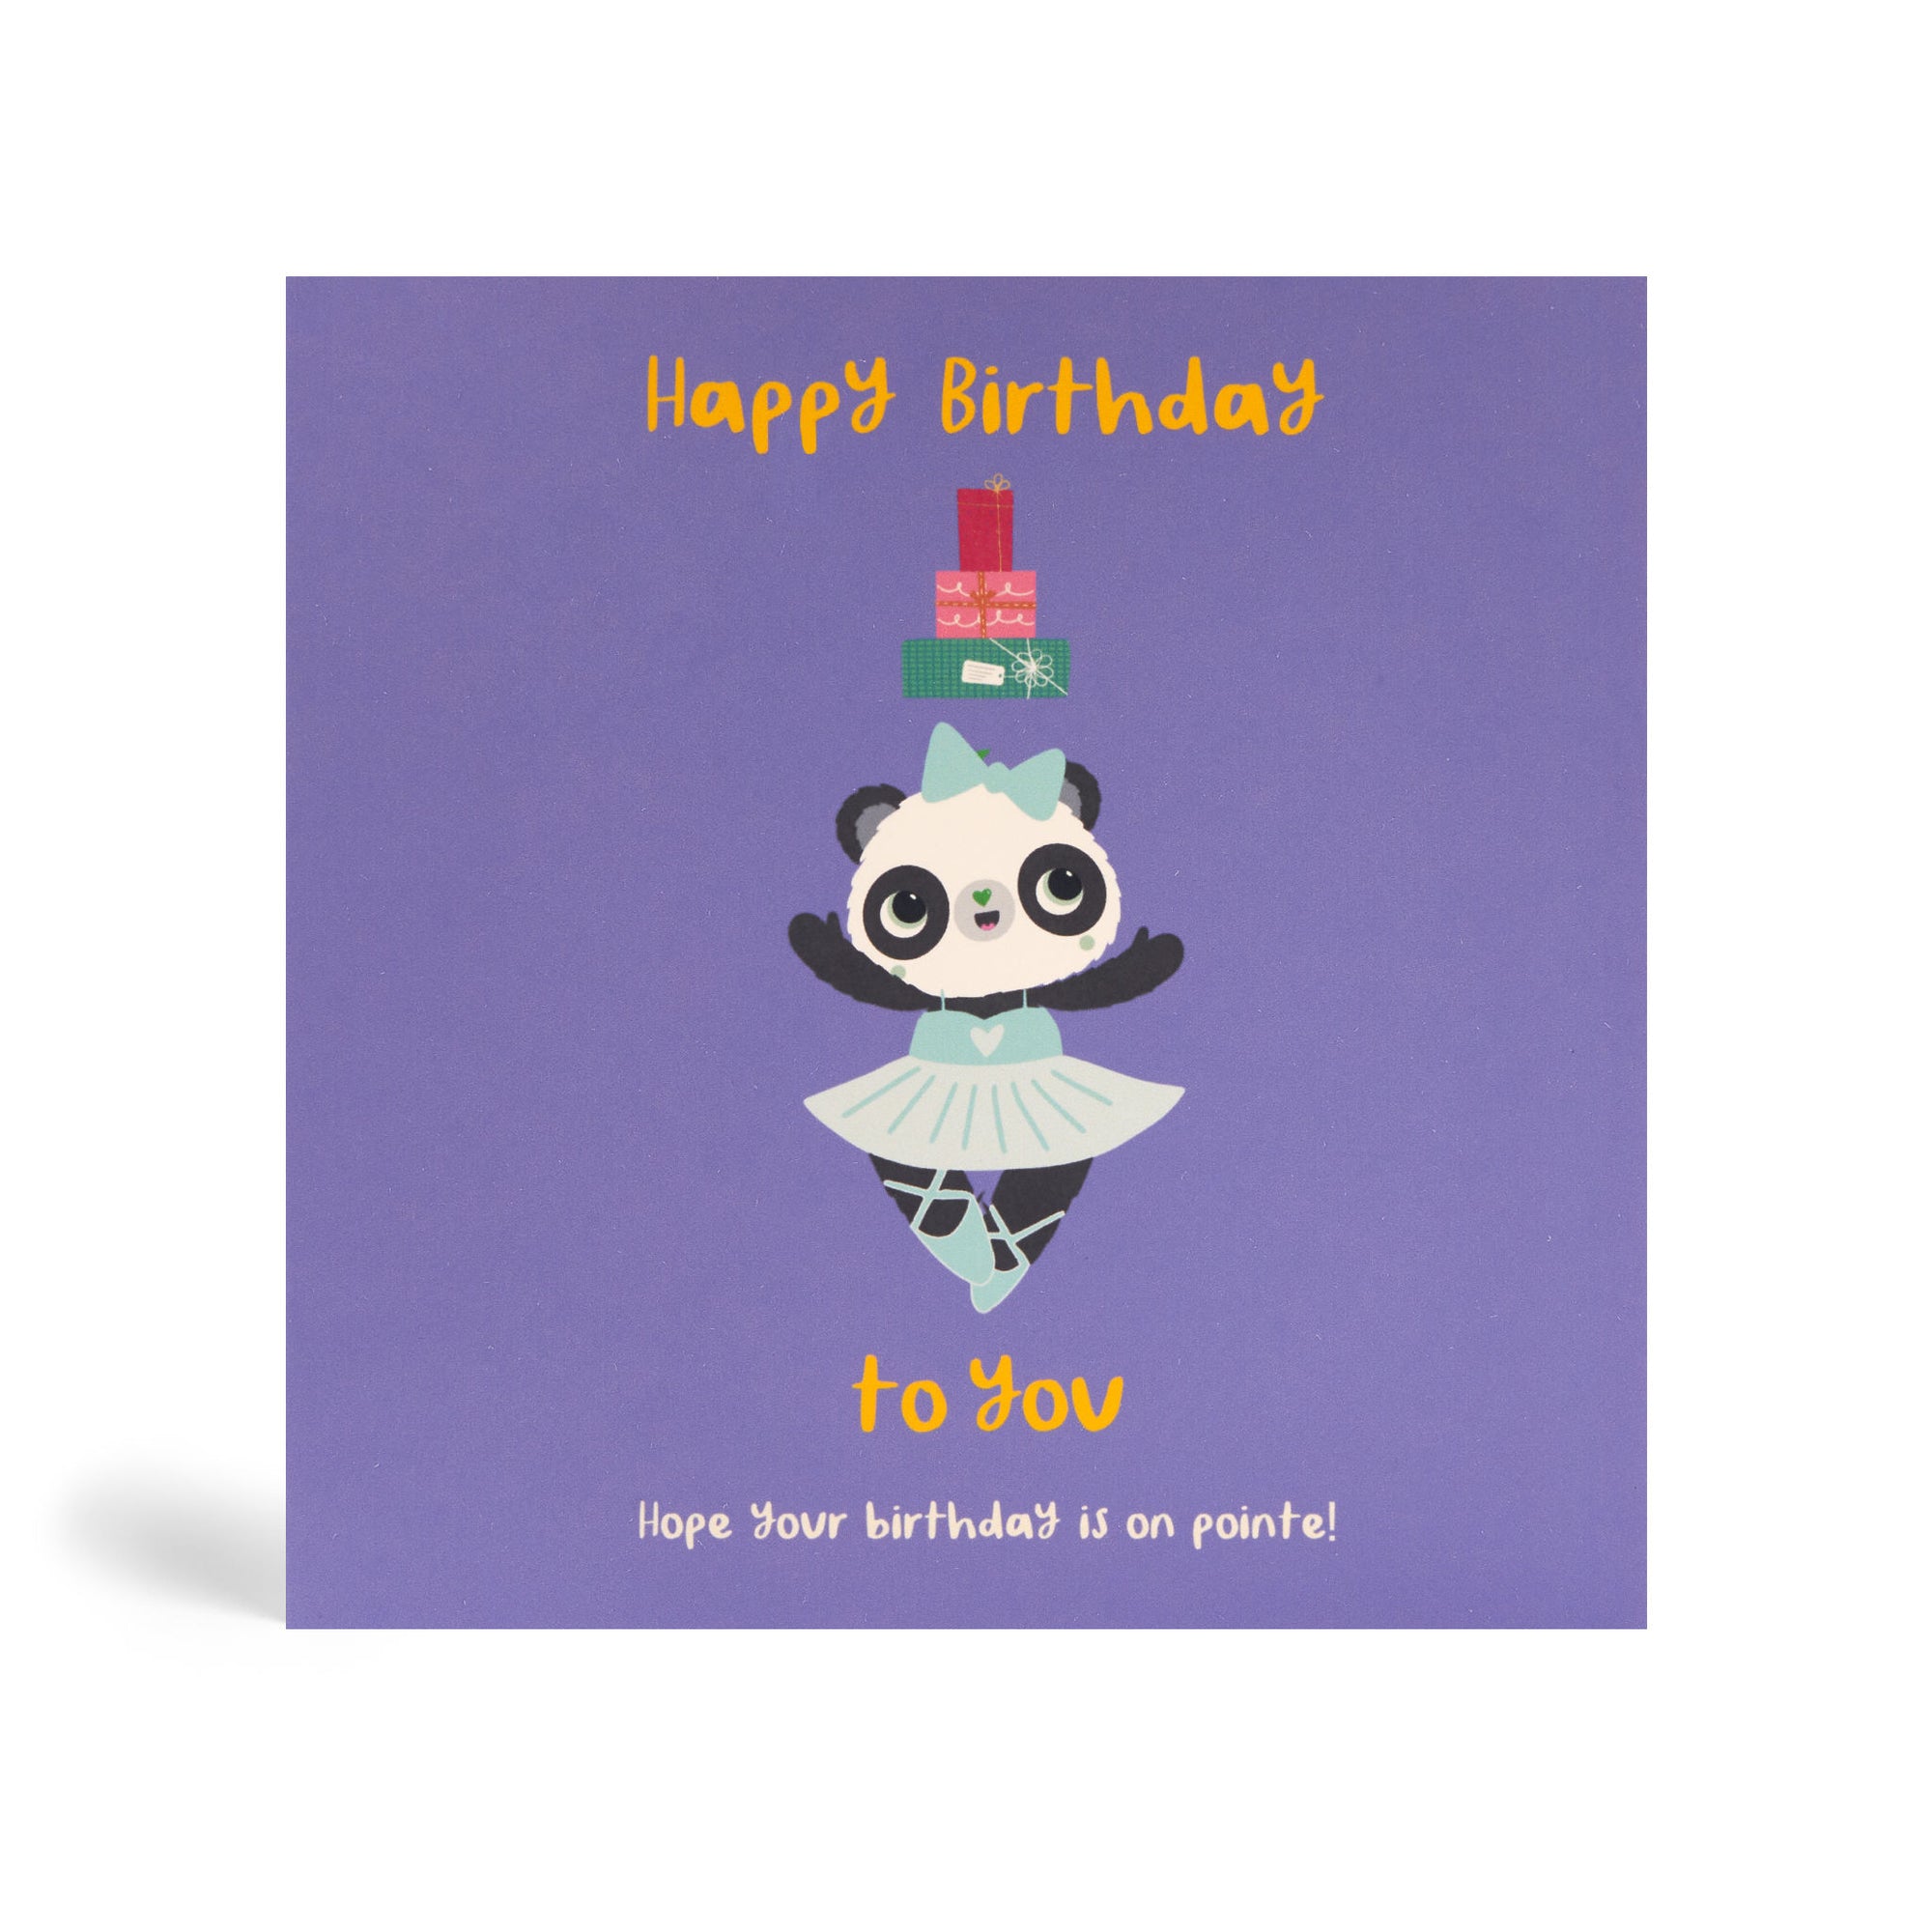 Purple 150mm square Eco-Friendly greeting cards made from bamboo and cotton linters with image of Ballet dancing Panda wearing Turquoise Ballet outfit with head bow and present falling on her head. The card says Happy Birthday to you. Hope your Birthday is on Pointe!